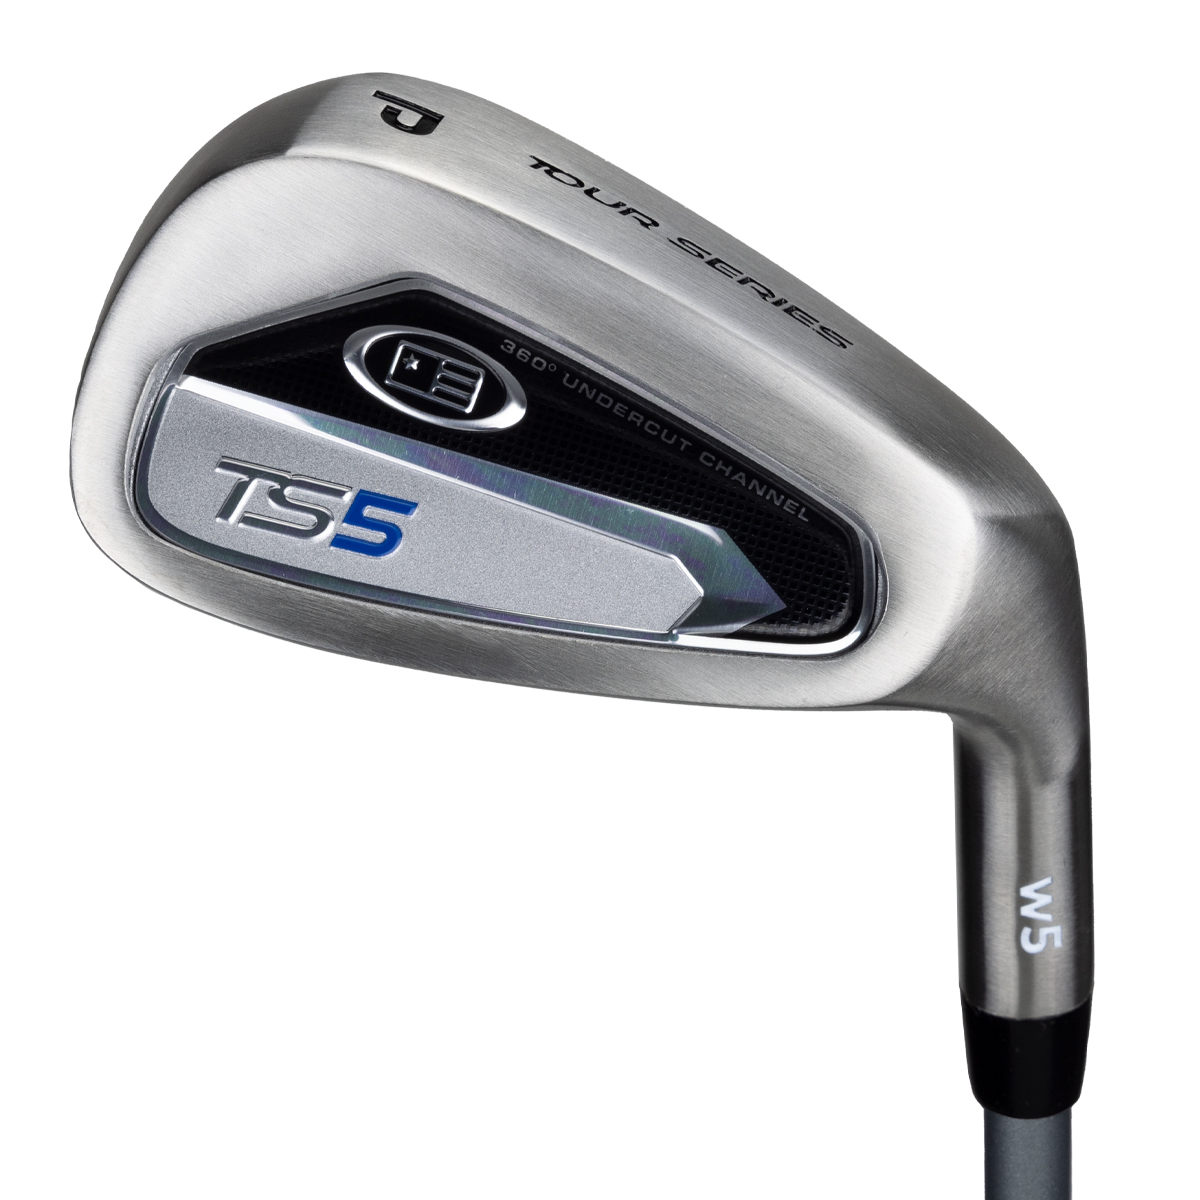 TS5-60  Pitching Wedge, w5 Graphite Shaft